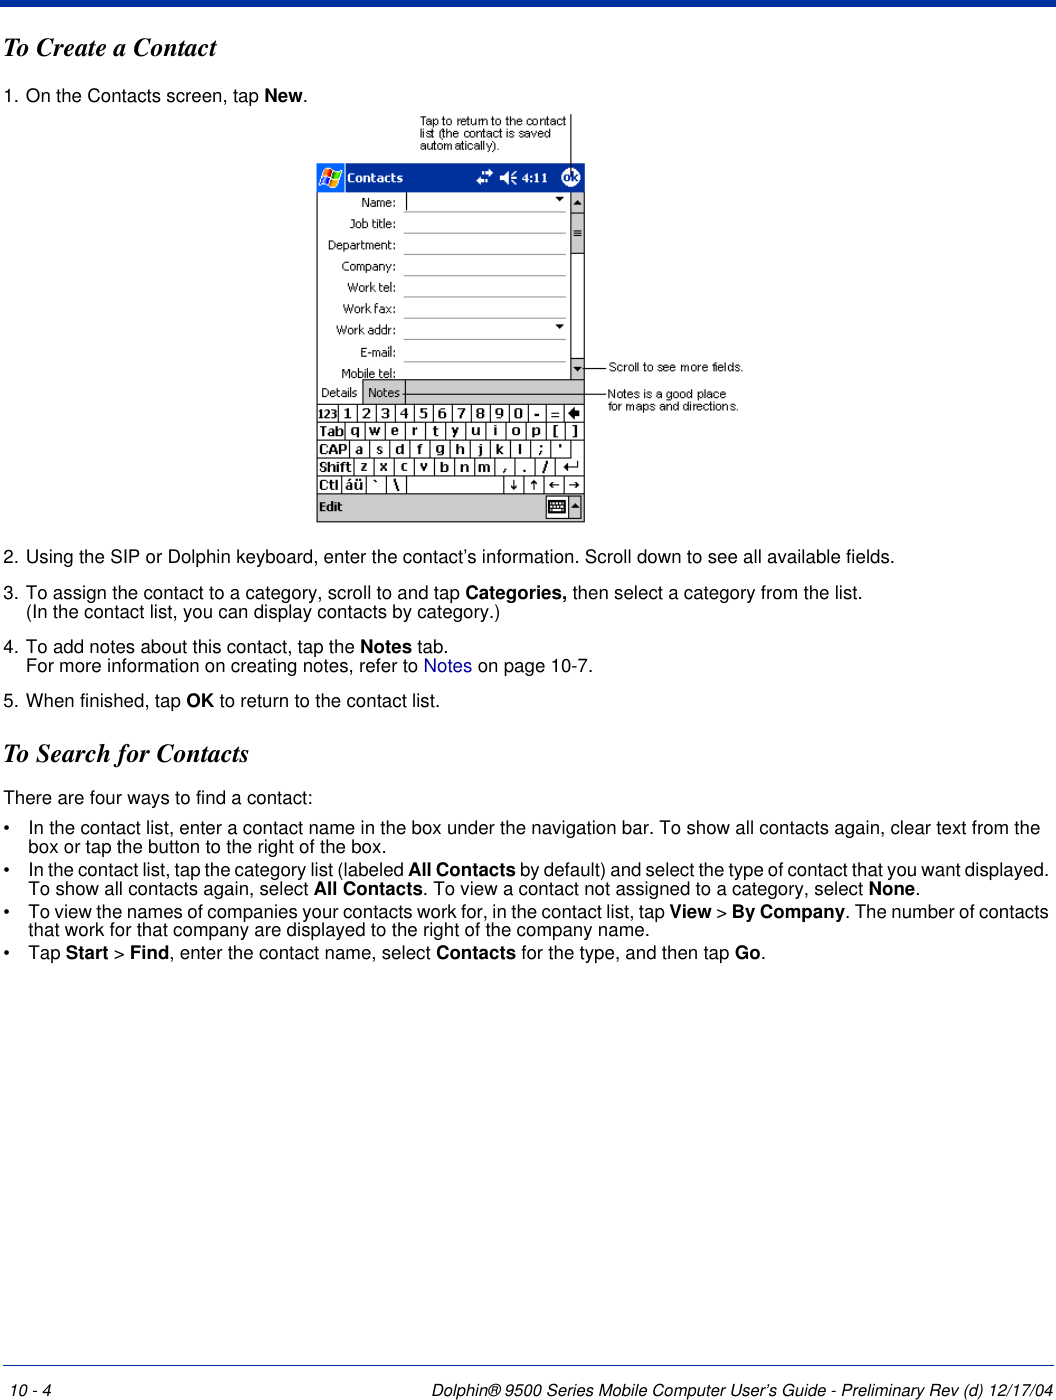 10 - 4 Dolphin® 9500 Series Mobile Computer User’s Guide - Preliminary Rev (d) 12/17/04To Create a Contact1. On the Contacts screen, tap New.2. Using the SIP or Dolphin keyboard, enter the contact’s information. Scroll down to see all available fields.3. To assign the contact to a category, scroll to and tap Categories, then select a category from the list.  (In the contact list, you can display contacts by category.)4. To add notes about this contact, tap the Notes tab. For more information on creating notes, refer to Notes on page 10-7.5. When finished, tap OK to return to the contact list.To Search for ContactsThere are four ways to find a contact: •           In the contact list, enter a contact name in the box under the navigation bar. To show all contacts again, clear text from the box or tap the button to the right of the box. •           In the contact list, tap the category list (labeled All Contacts by default) and select the type of contact that you want displayed. To show all contacts again, select All Contacts. To view a contact not assigned to a category, select None. •           To view the names of companies your contacts work for, in the contact list, tap View &gt; By Company. The number of contacts that work for that company are displayed to the right of the company name. •           Tap Start &gt; Find, enter the contact name, select Contacts for the type, and then tap Go. 